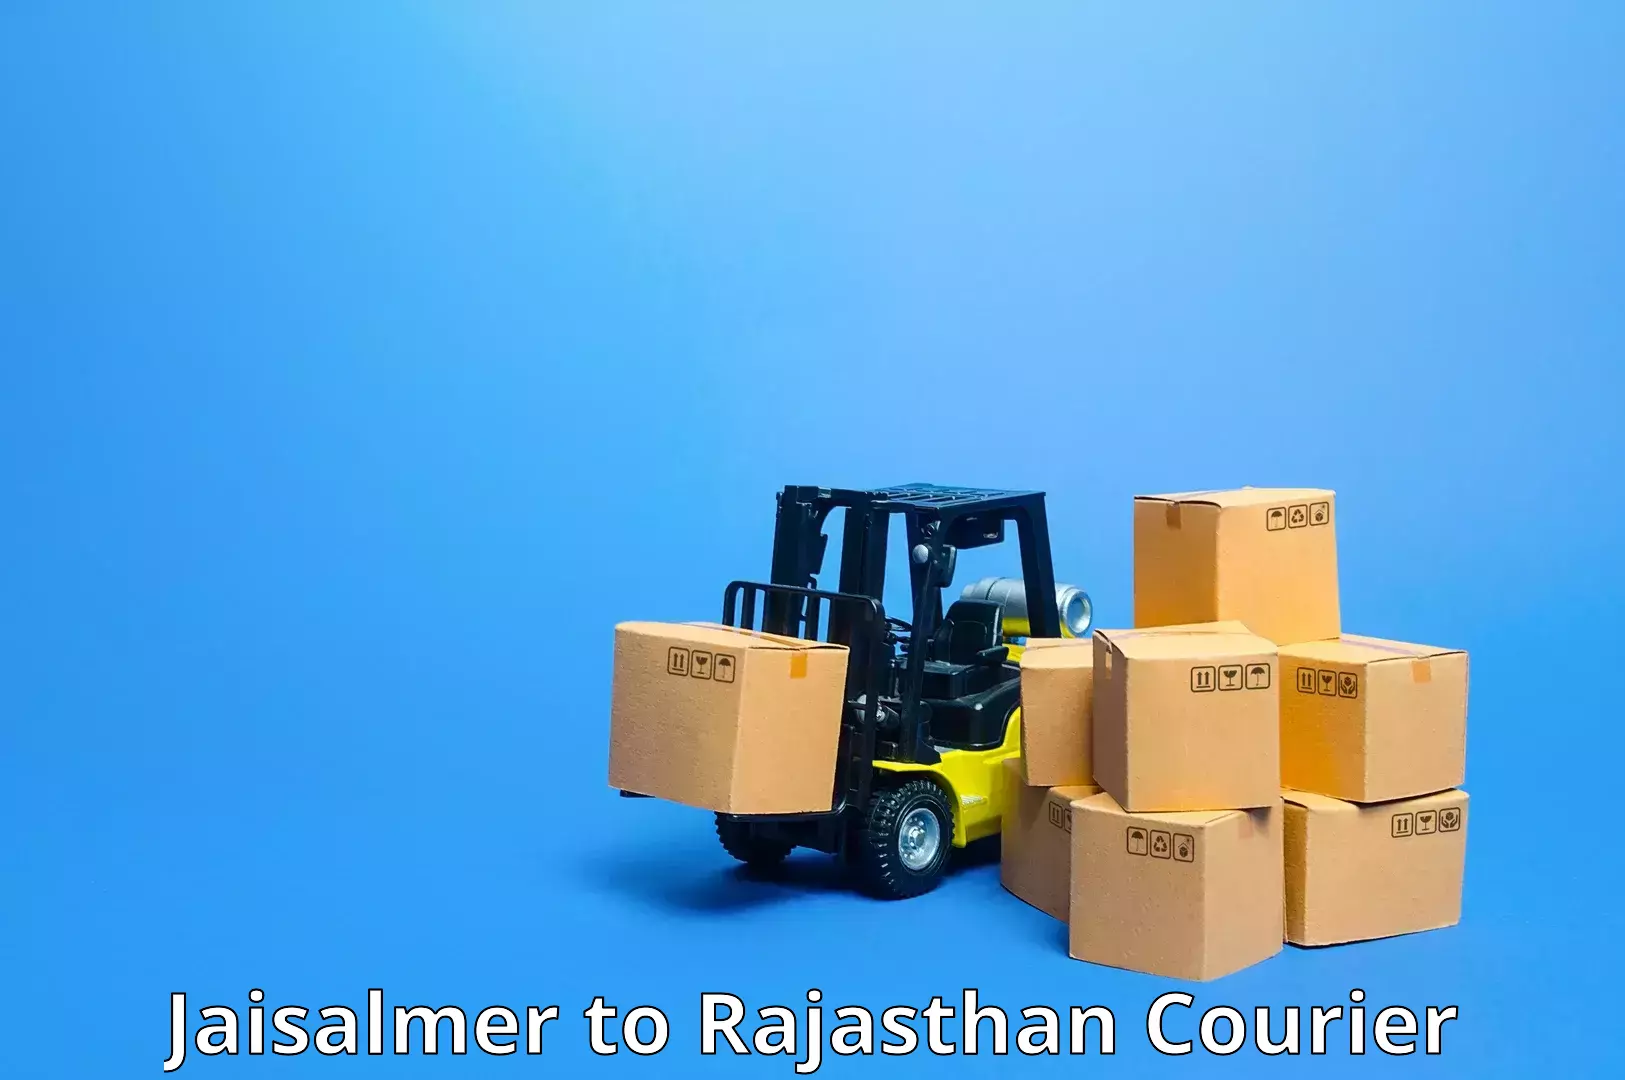 Flexible delivery schedules Jaisalmer to Rajasthan